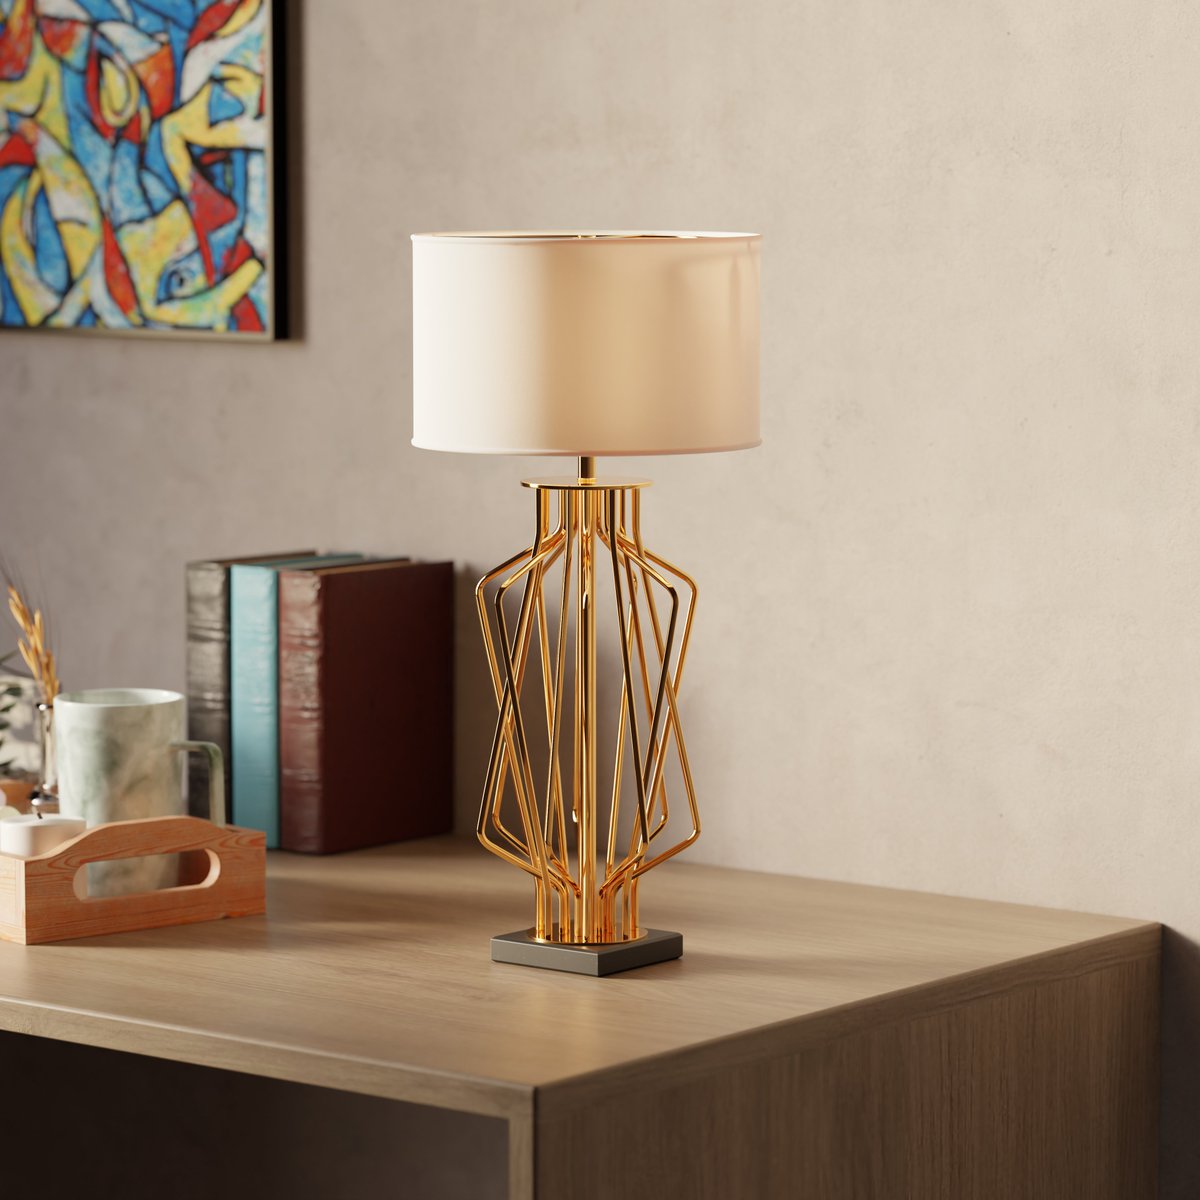 3D Rendering of a Lamp

To learn more about our services, Contact us!

#productvisualization #cgi_services #lamp #lampdesign #lightfixtures #lighting #lightingdesign #lightingproducts #3d #3dmodlling #3ddesign #3dvisualization #3drendering #cgiartist #lowpoly3d